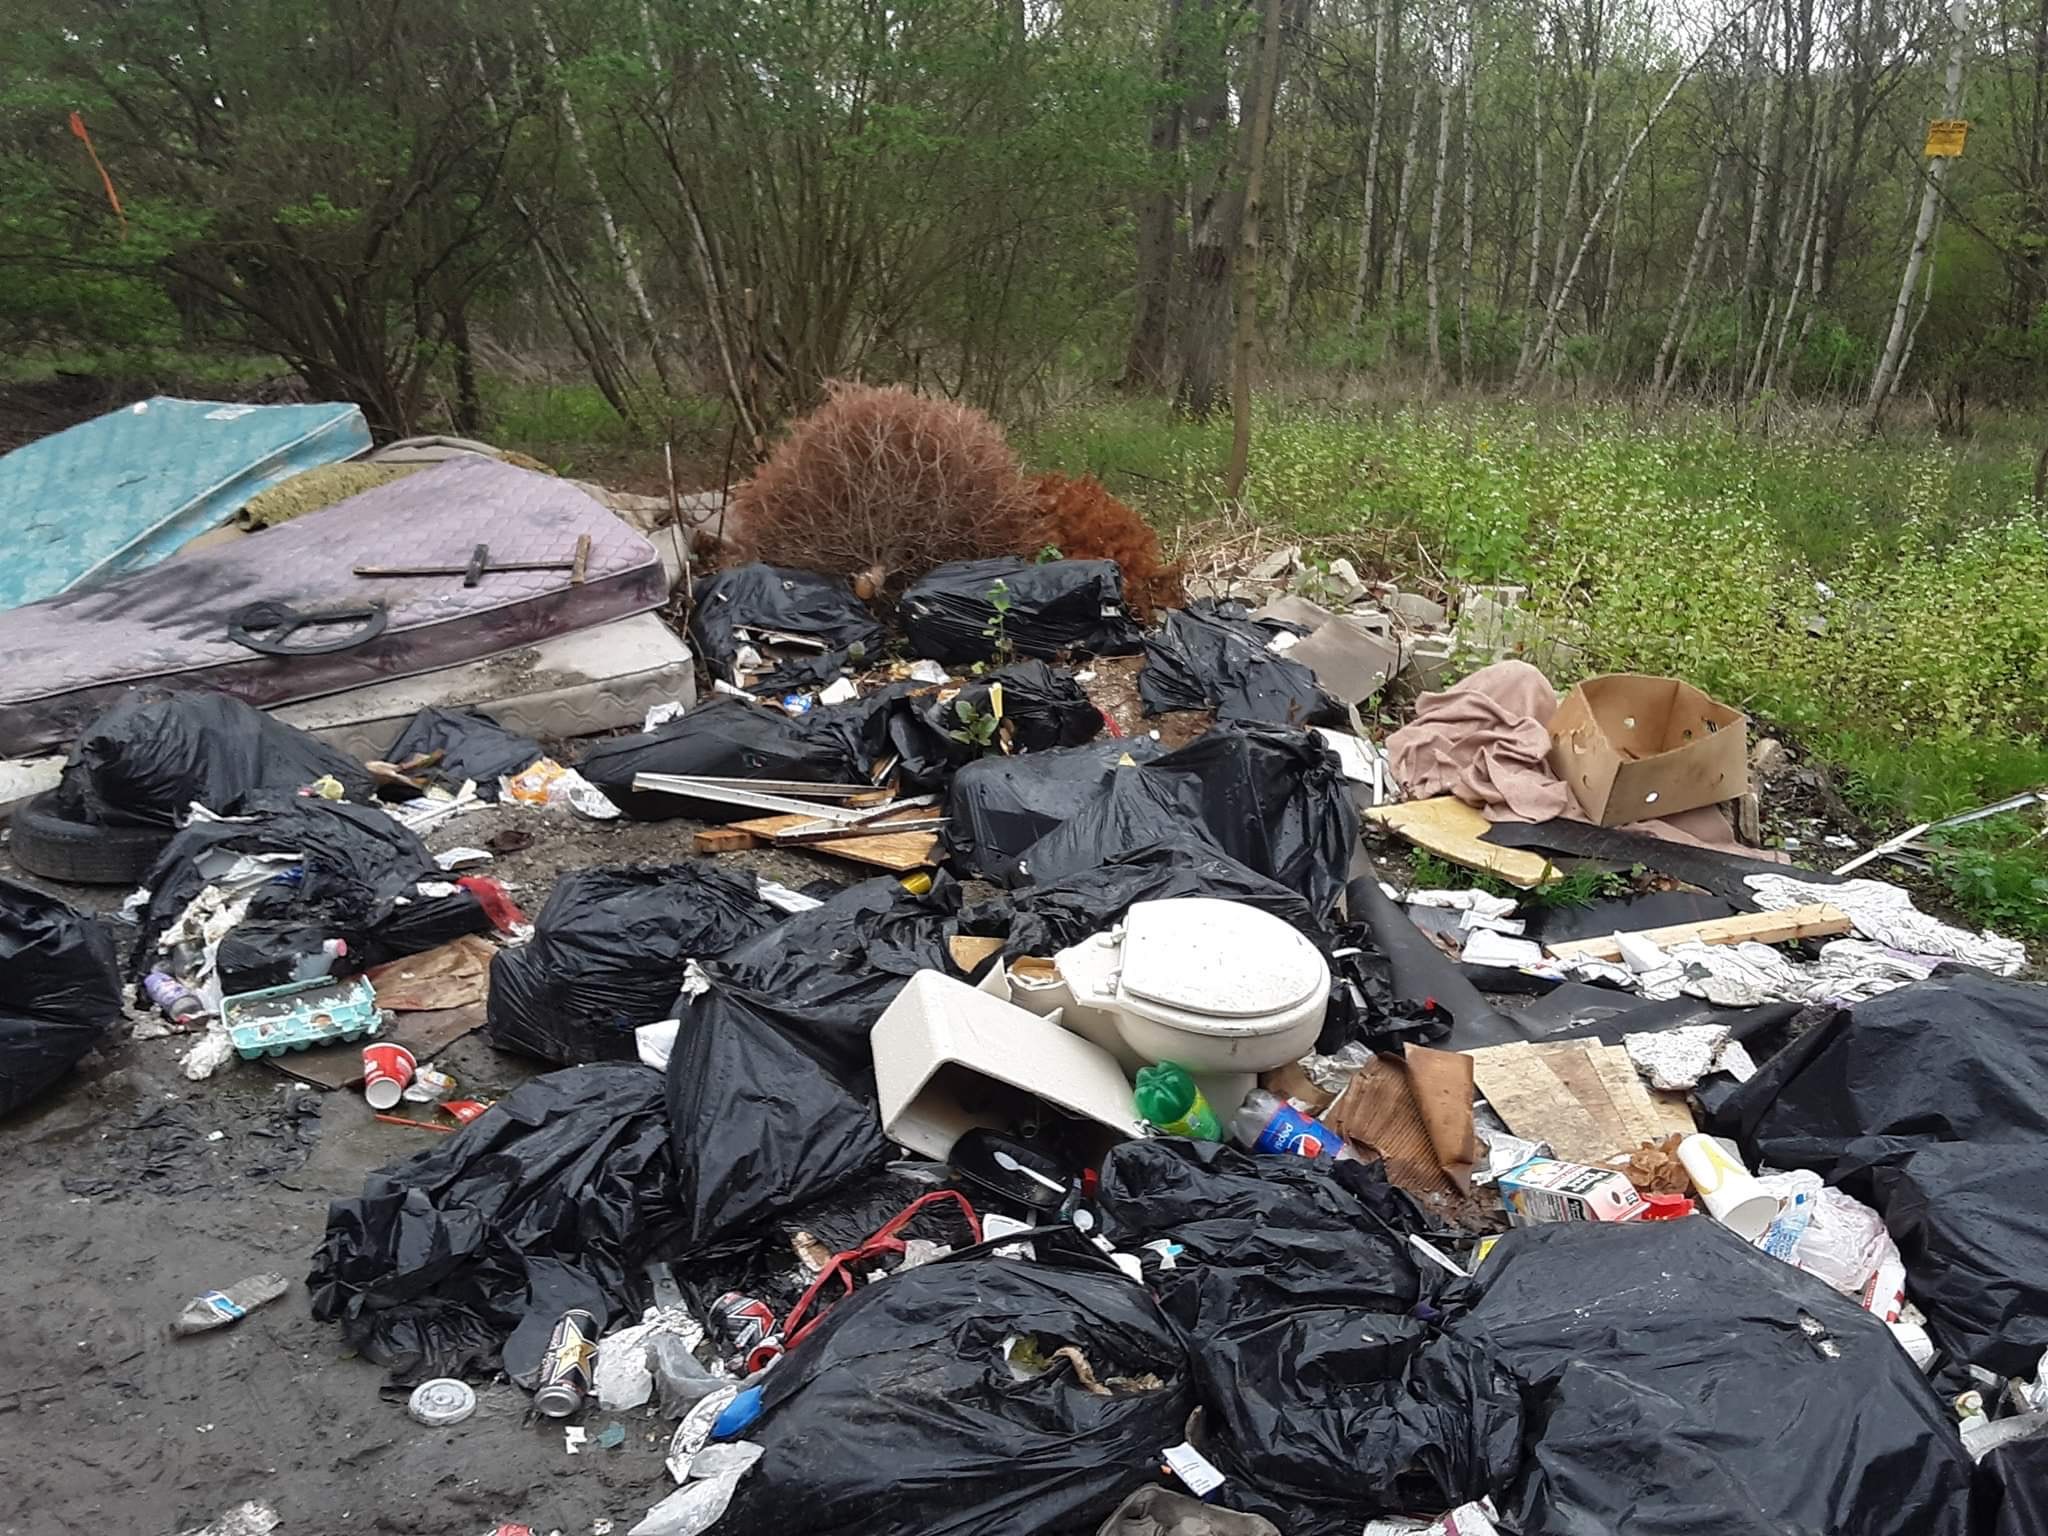 Trash at an illegal dump site in PA